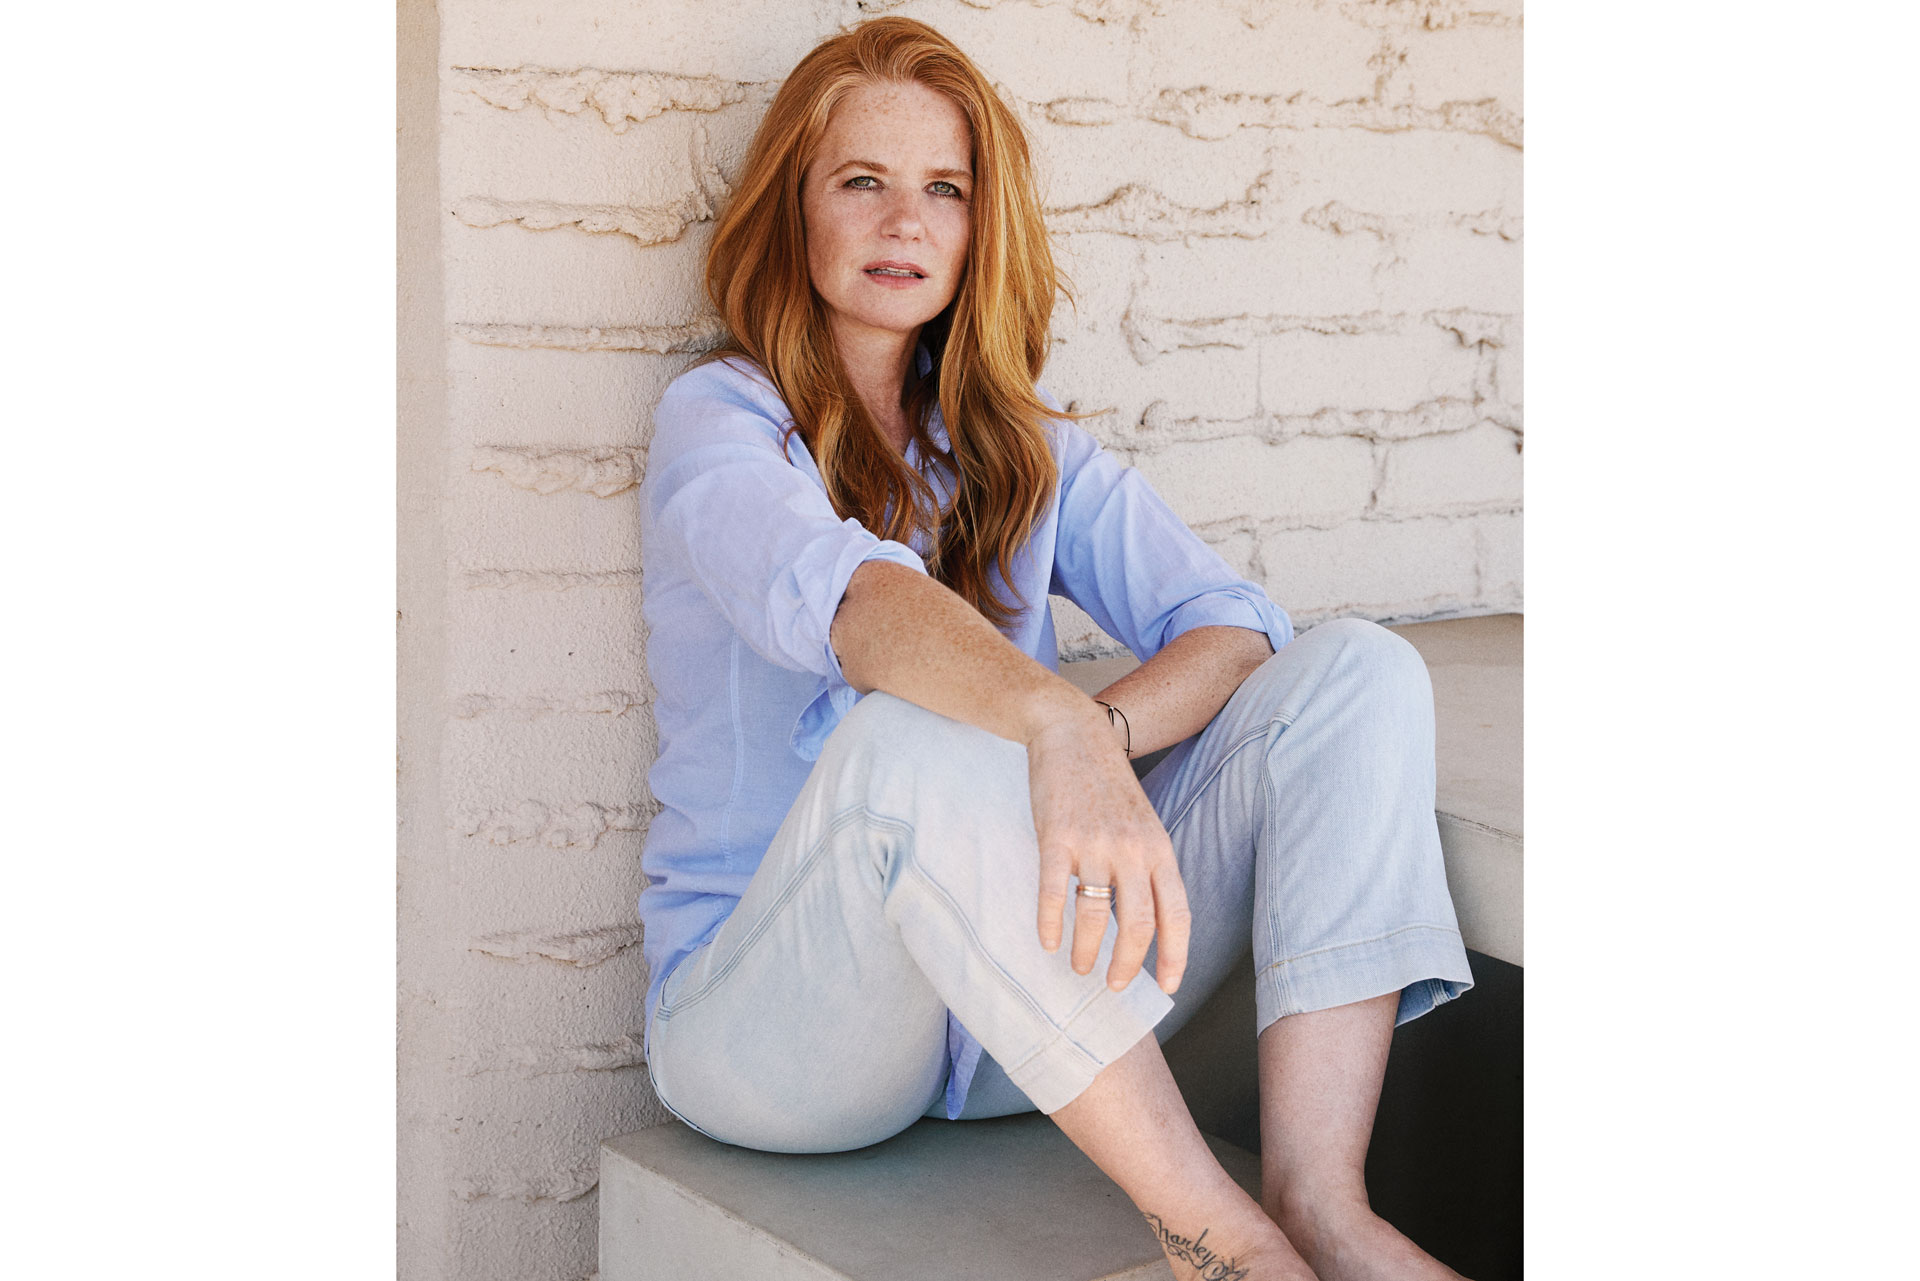 The Rurbanist: Q&A with Patsy Palmer - C&TH Culture